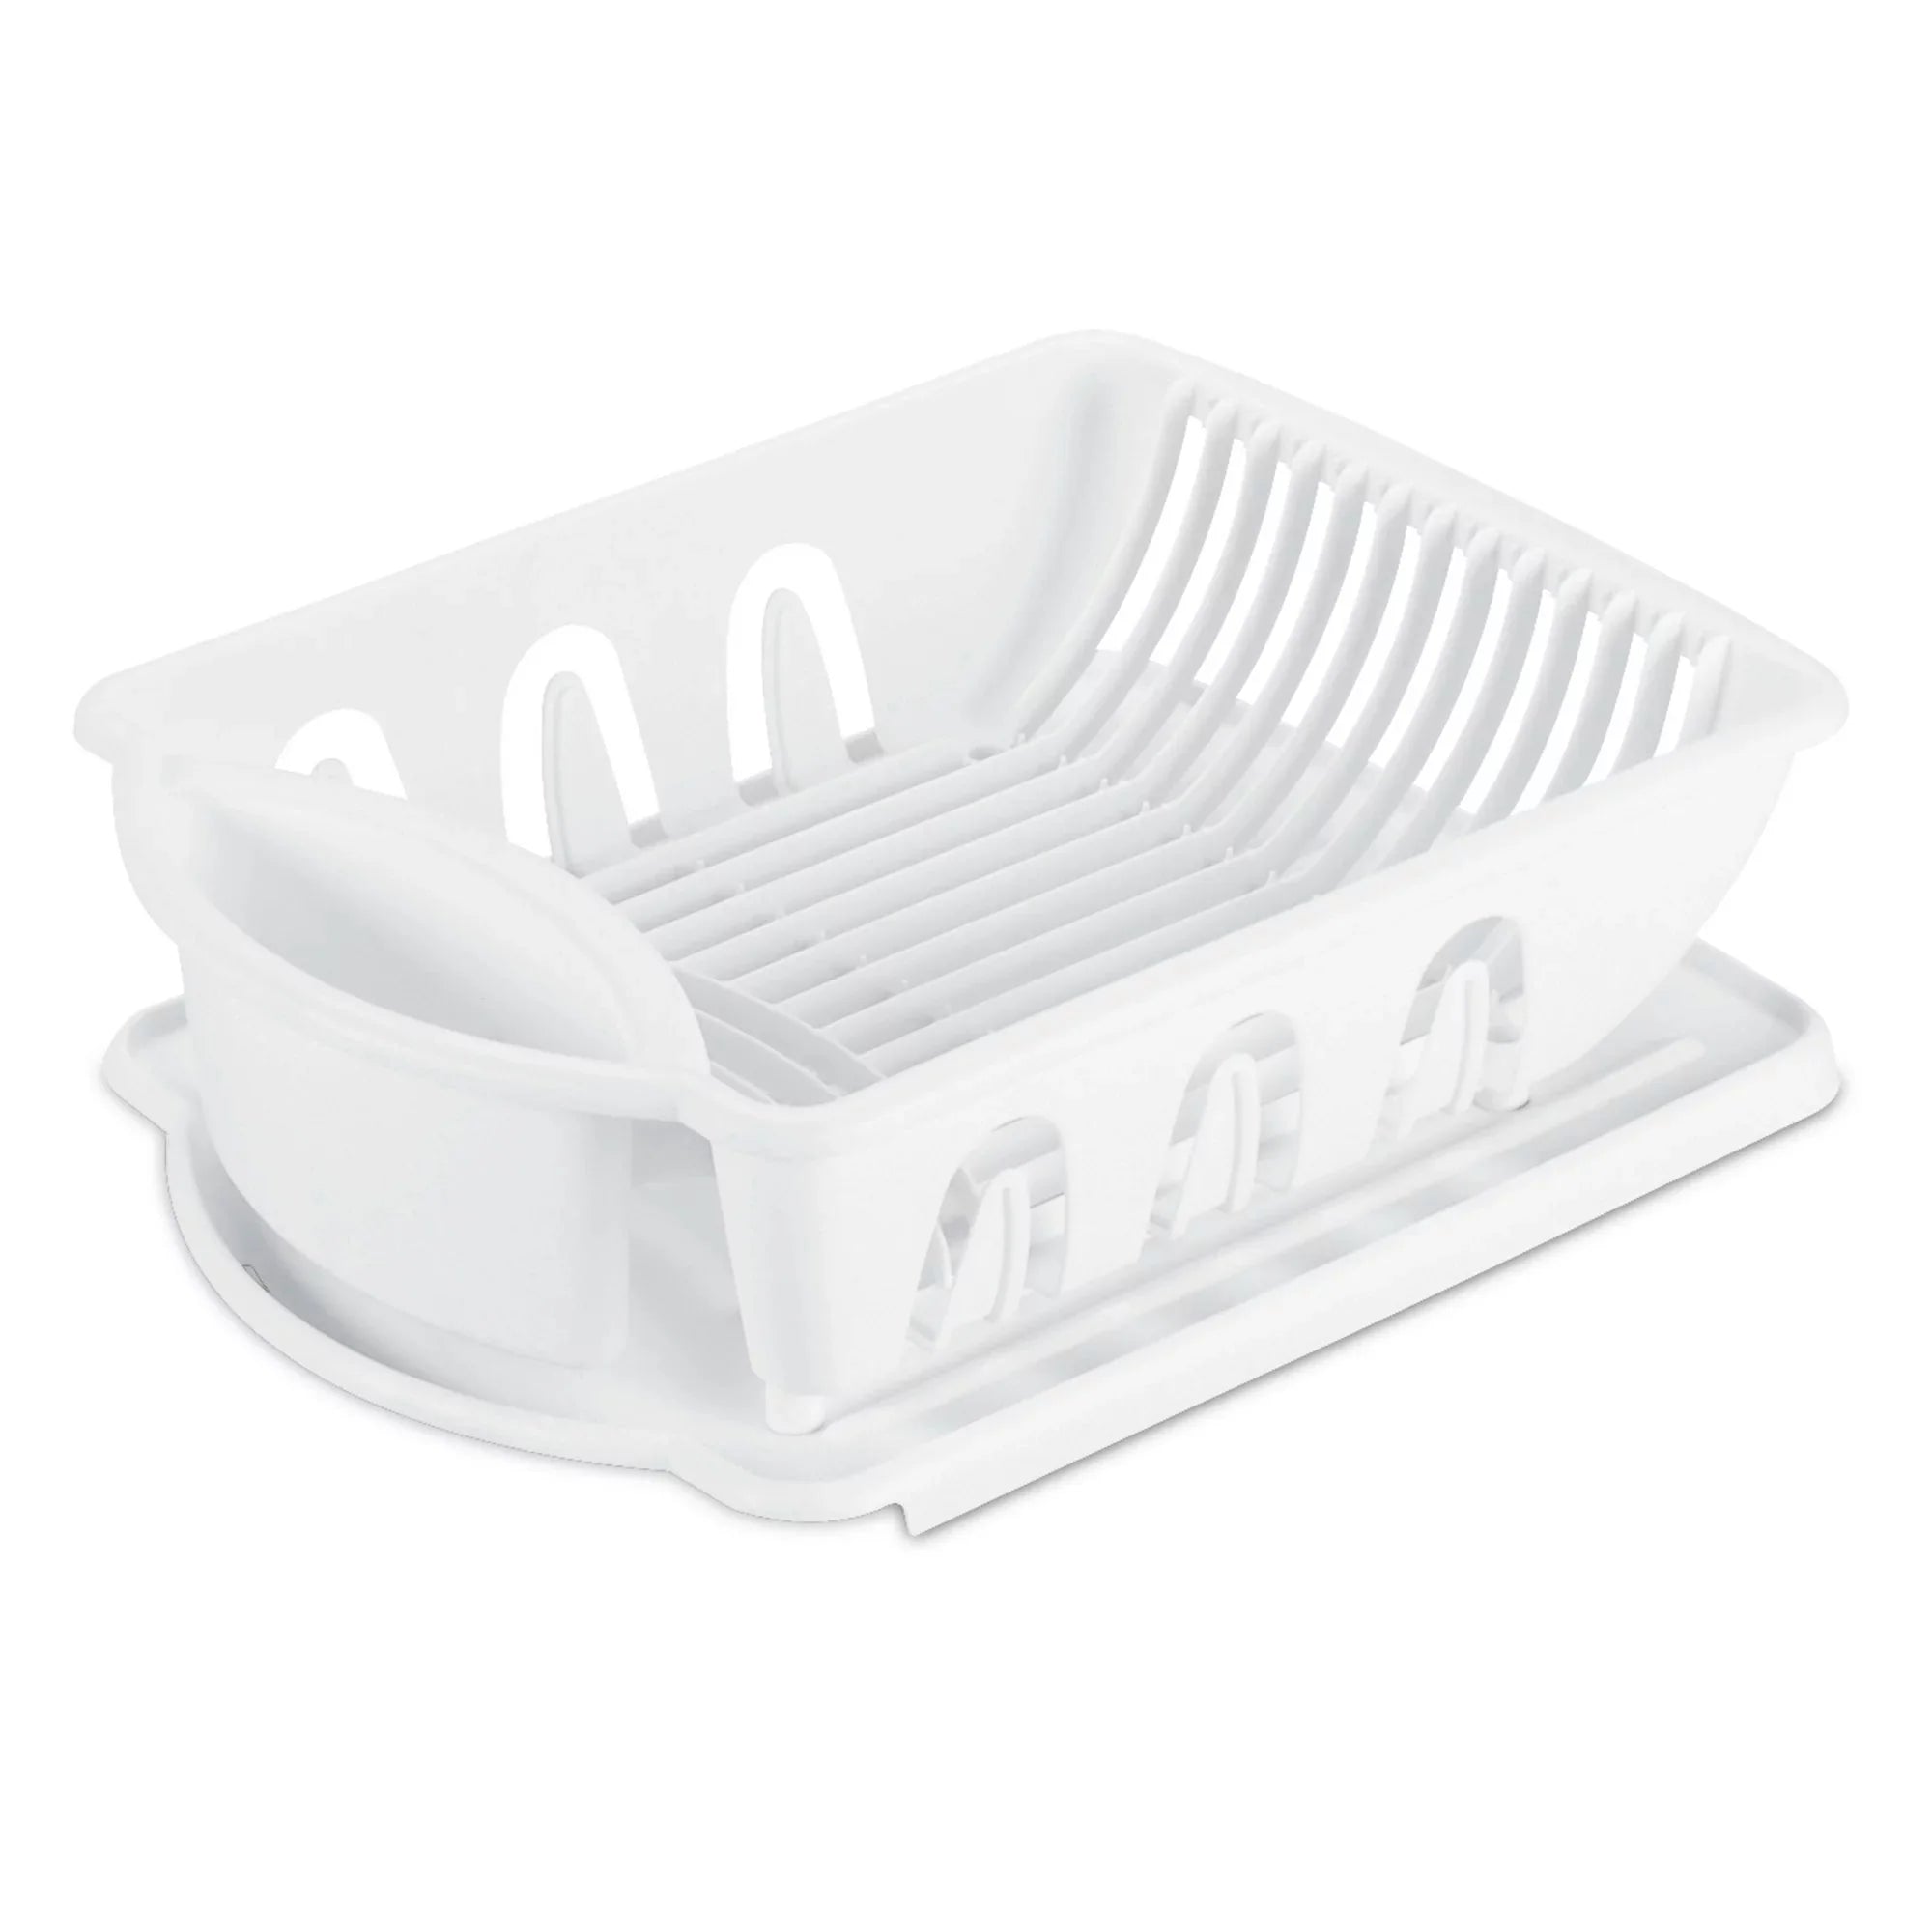 Wholesale prices with free shipping all over United States Sterilite 2-Piece Dish Rack Dish Drainer Set, White - Steven Deals